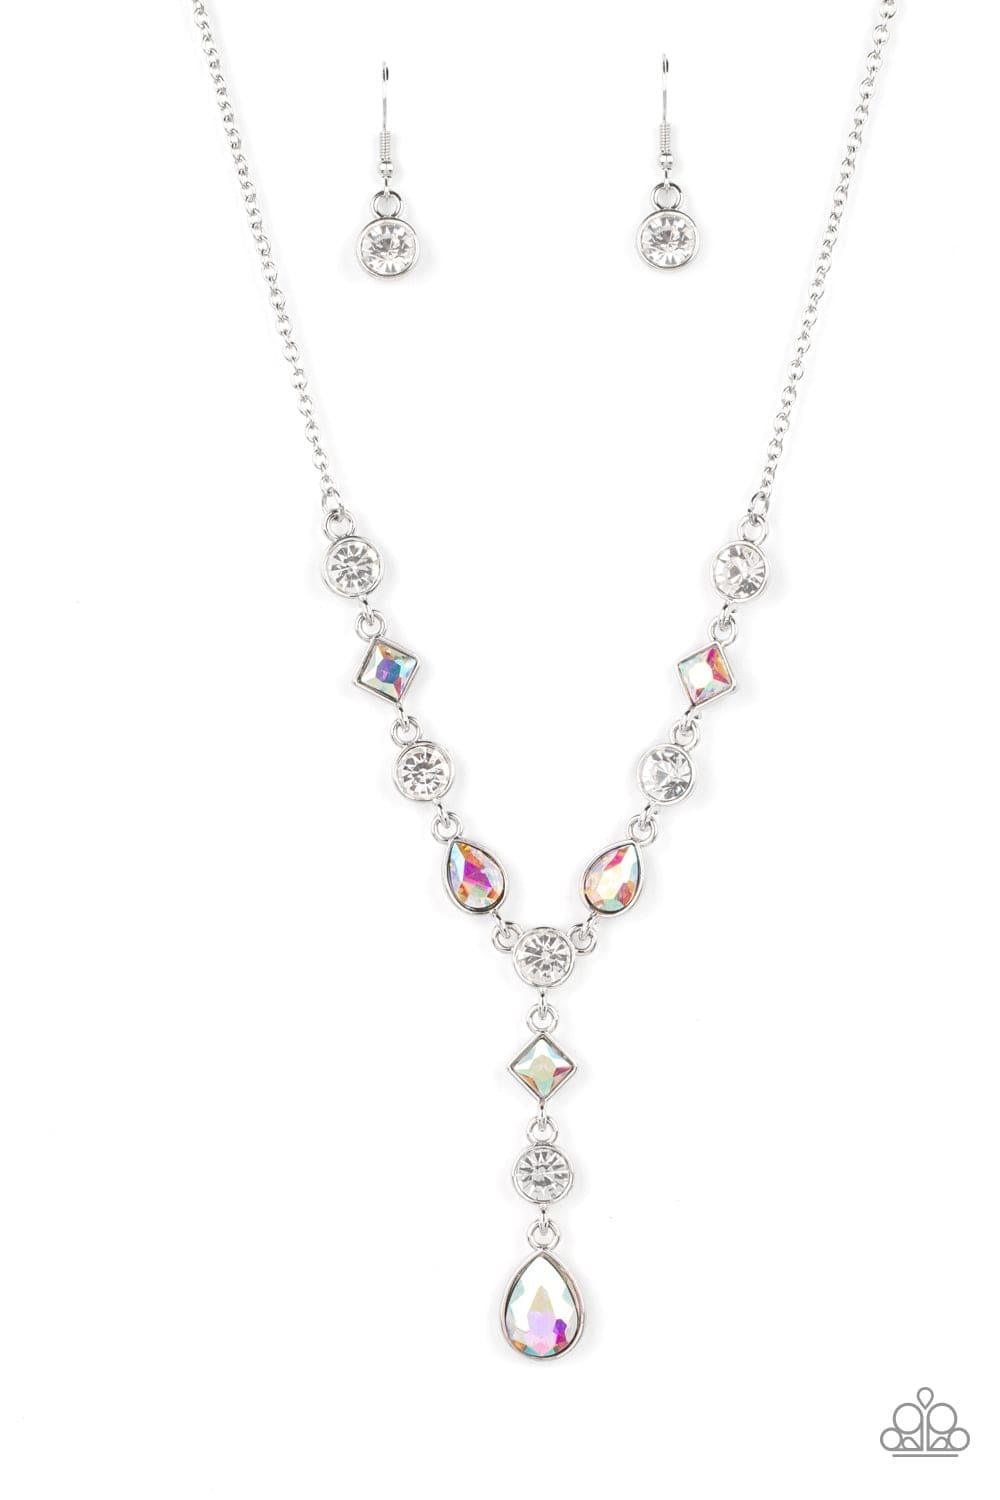 Paparazzi Accessories - Forget The Crown - Multicolor Necklace - Bling by JessieK